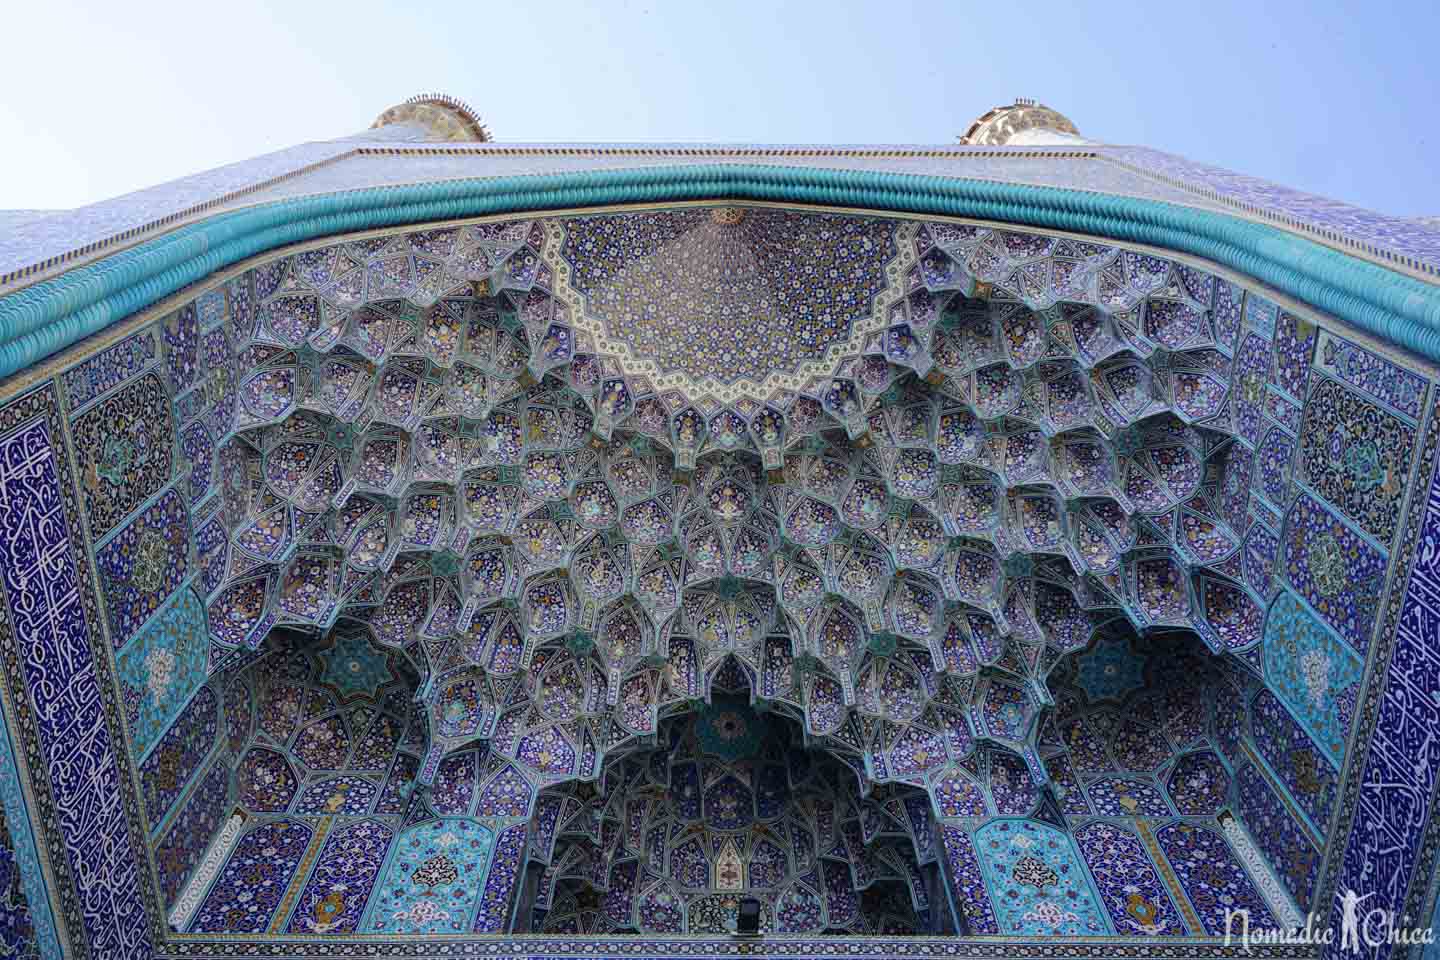 Iran Travel Tips, all you need to know before your trip (ppsst It’s safe!)